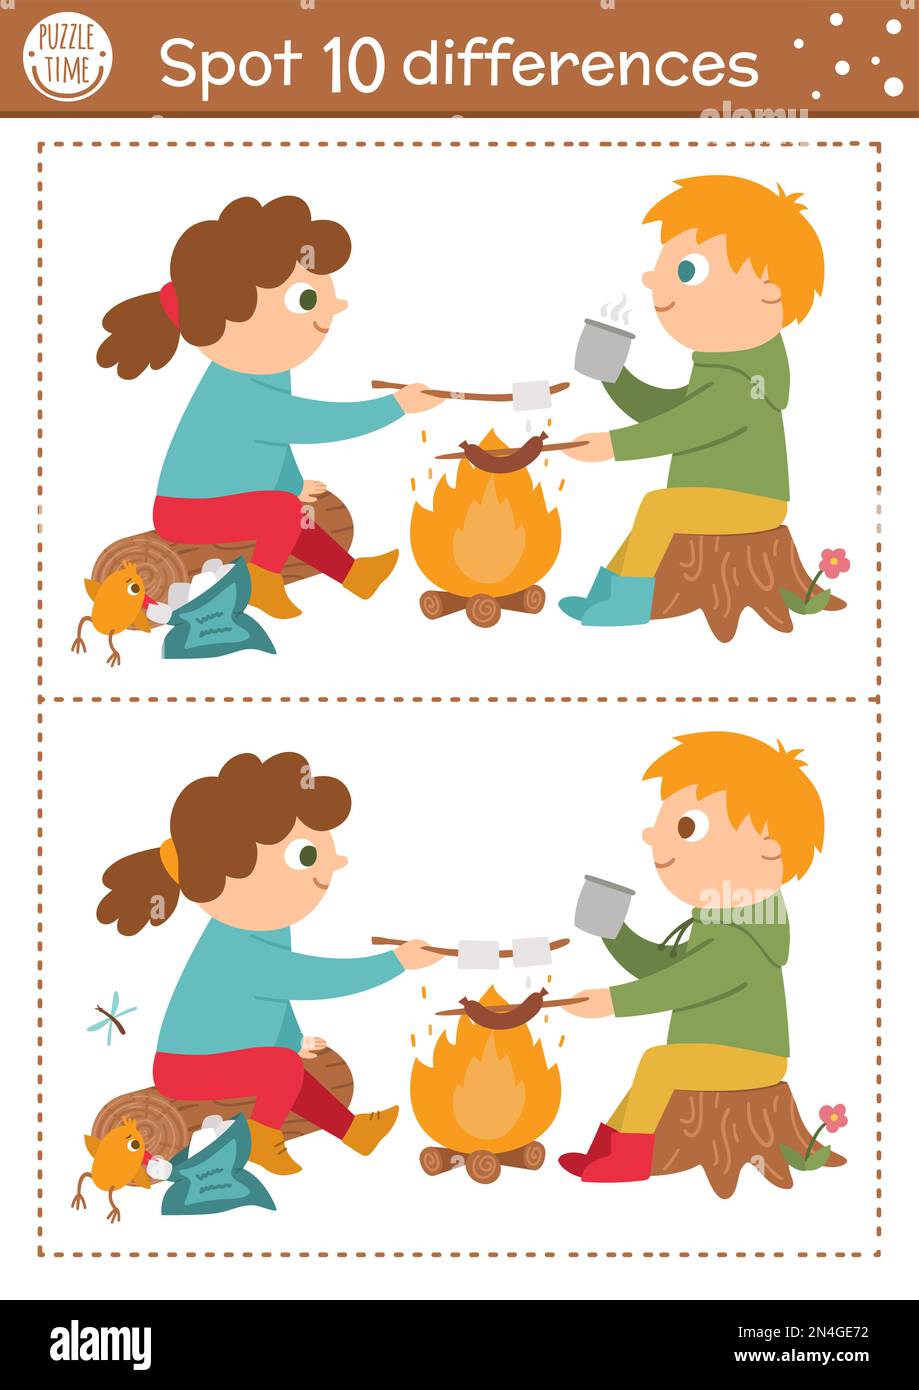 Find differences game for children. Summer camp educational activity with kids and fire. Printable worksheet with cute camping or forest scenery. Wood Stock Vector